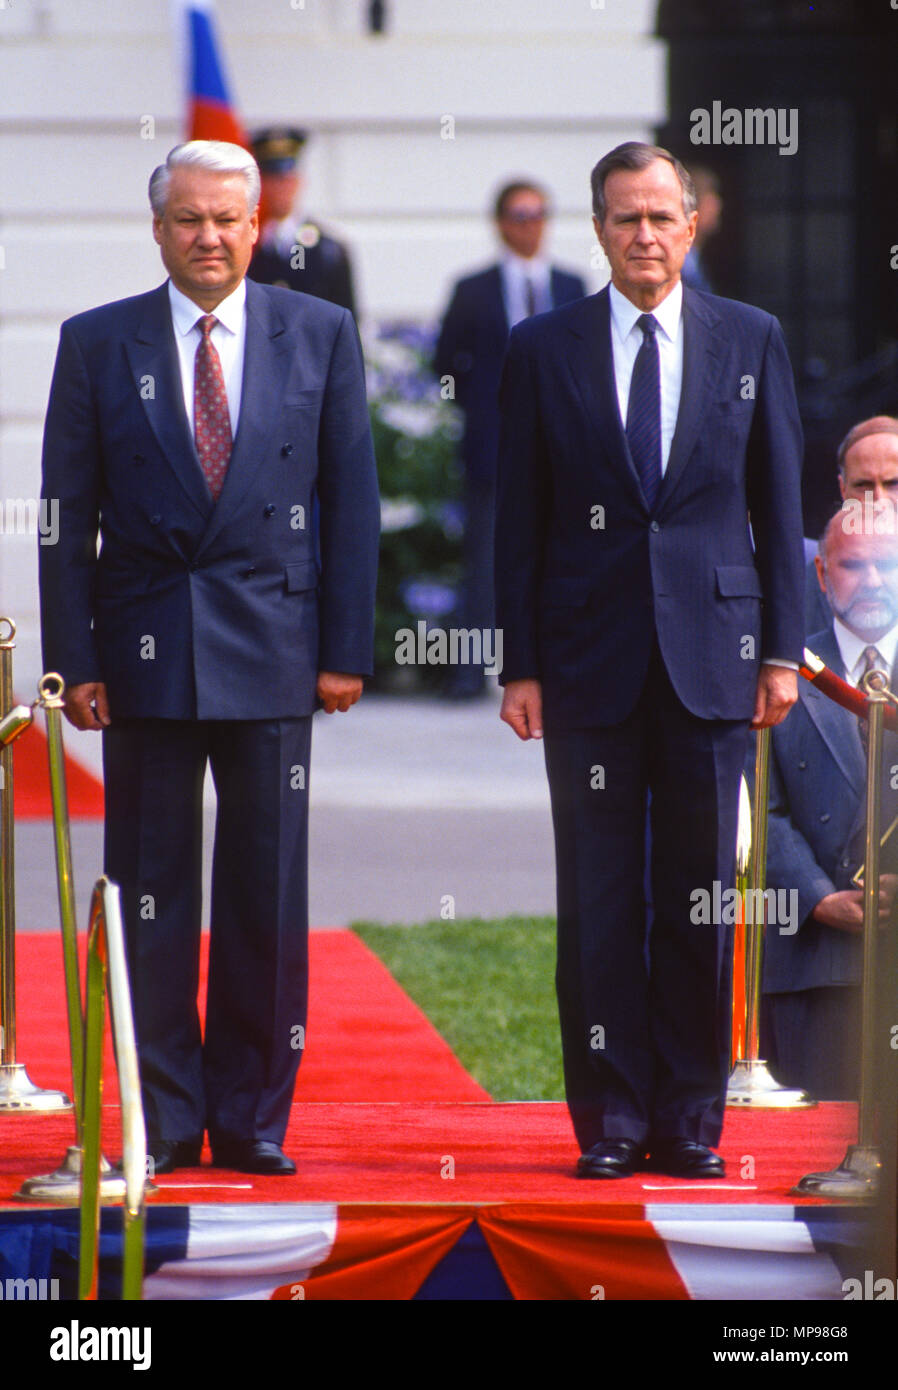 WASHINGTON, DC, USA - JUNE 17, 1992: Russia President Boris Yeltin, left, during summit arrival ceremony on White House South Lawn, with President George H.W. Bush. Stock Photo